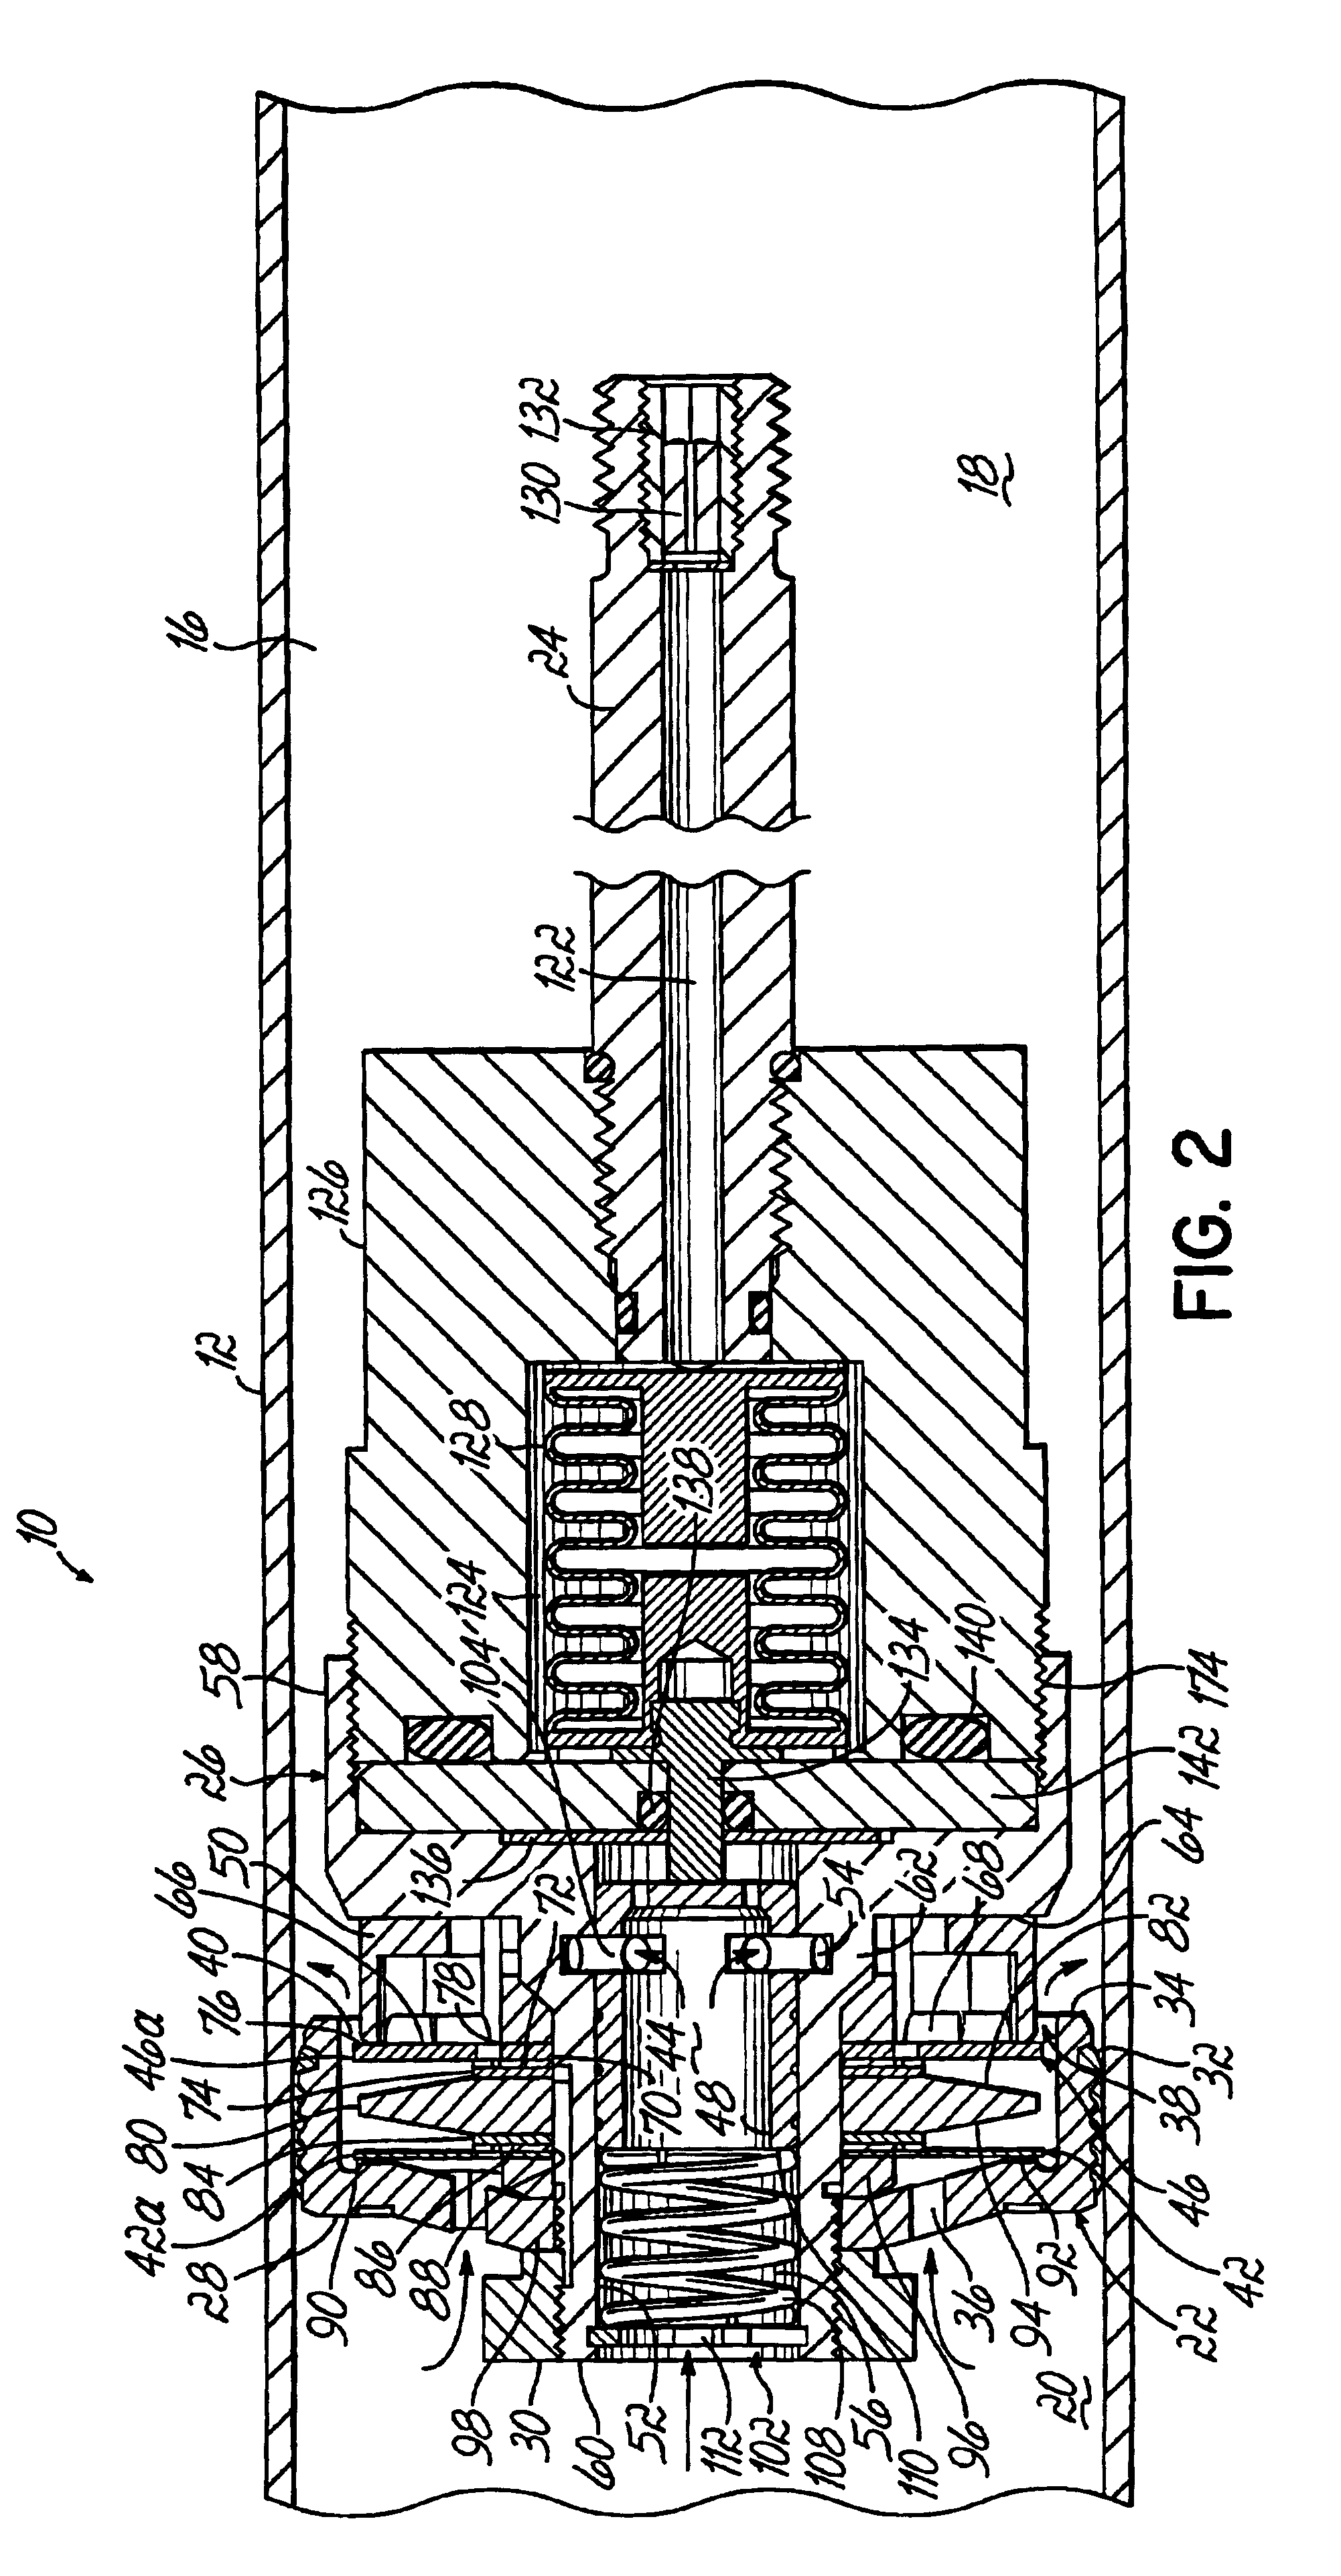 Piston and rod assembly for air-actuated variable damping